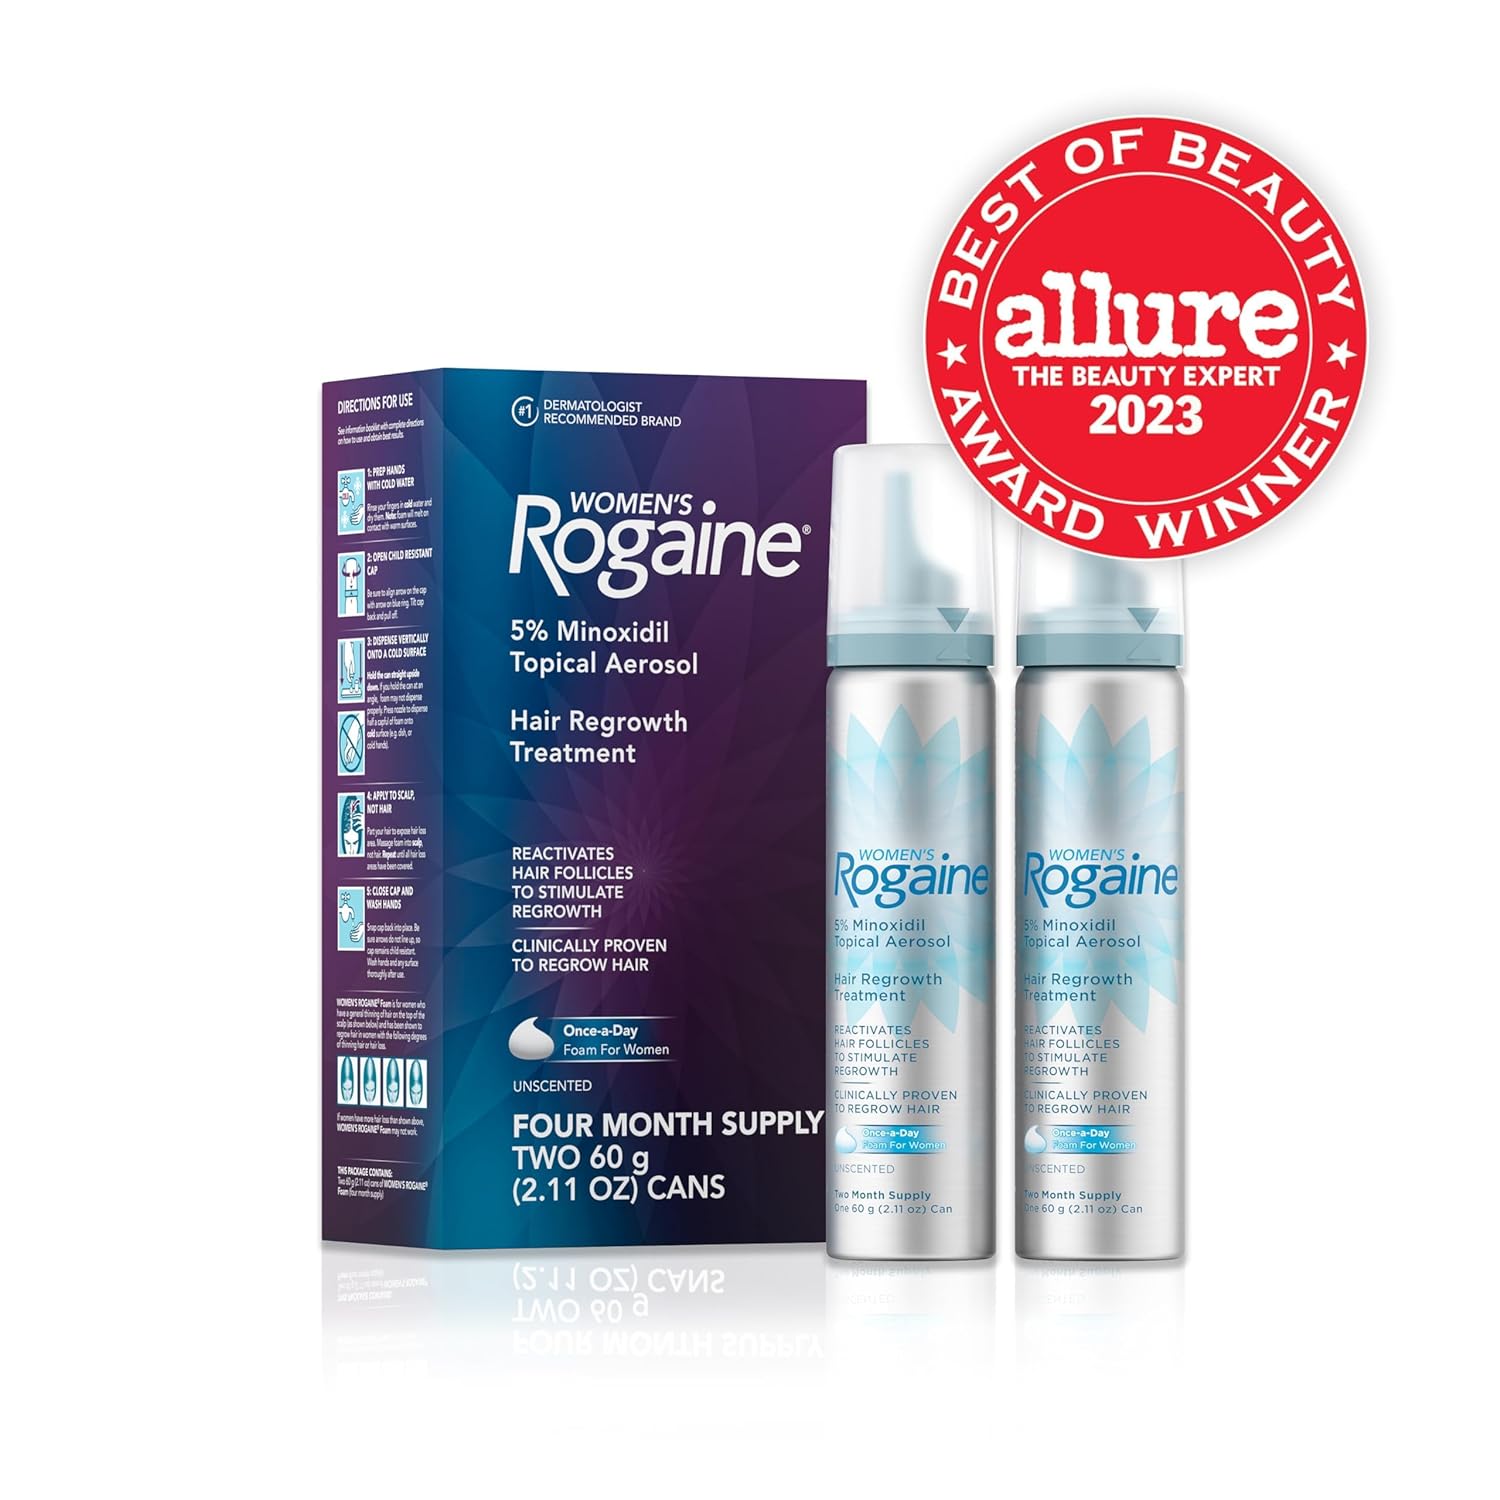 Women's Rogaine 5% Minoxidil Foam, Topical Once-A-Day Hair Loss Treatment for Women to Regrow Fuller, Thicker Hair, Unscented, 4-Month Supply, 2 x 2.11 oz